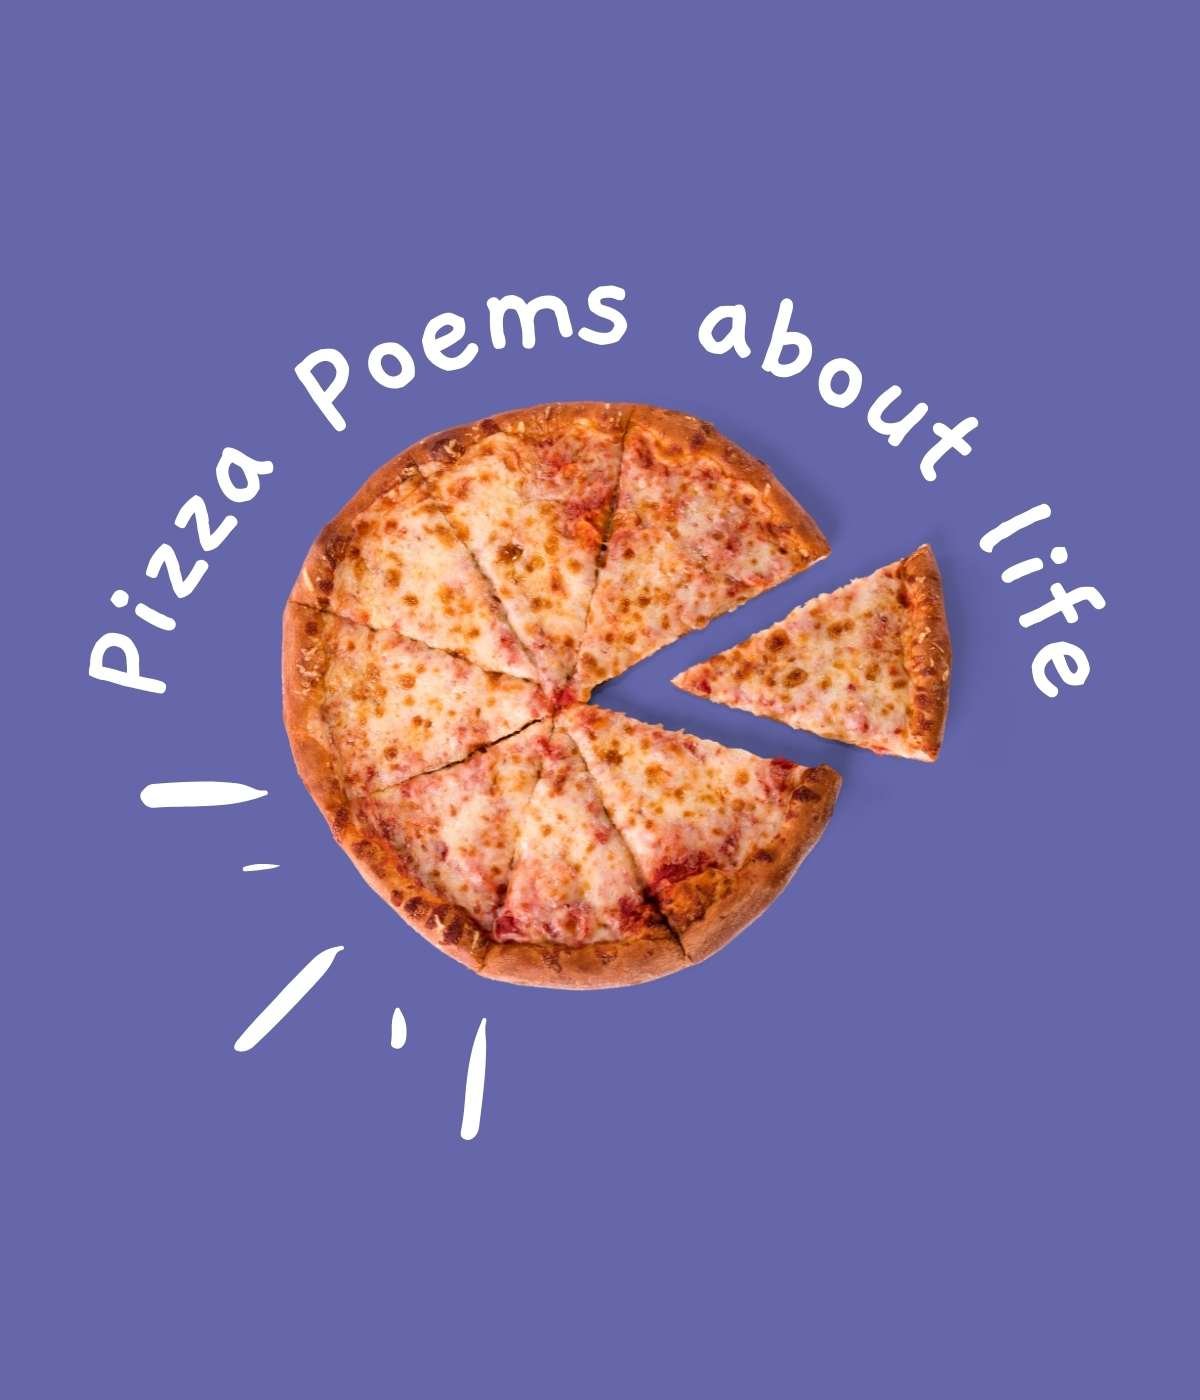 Pizza Poems About Life